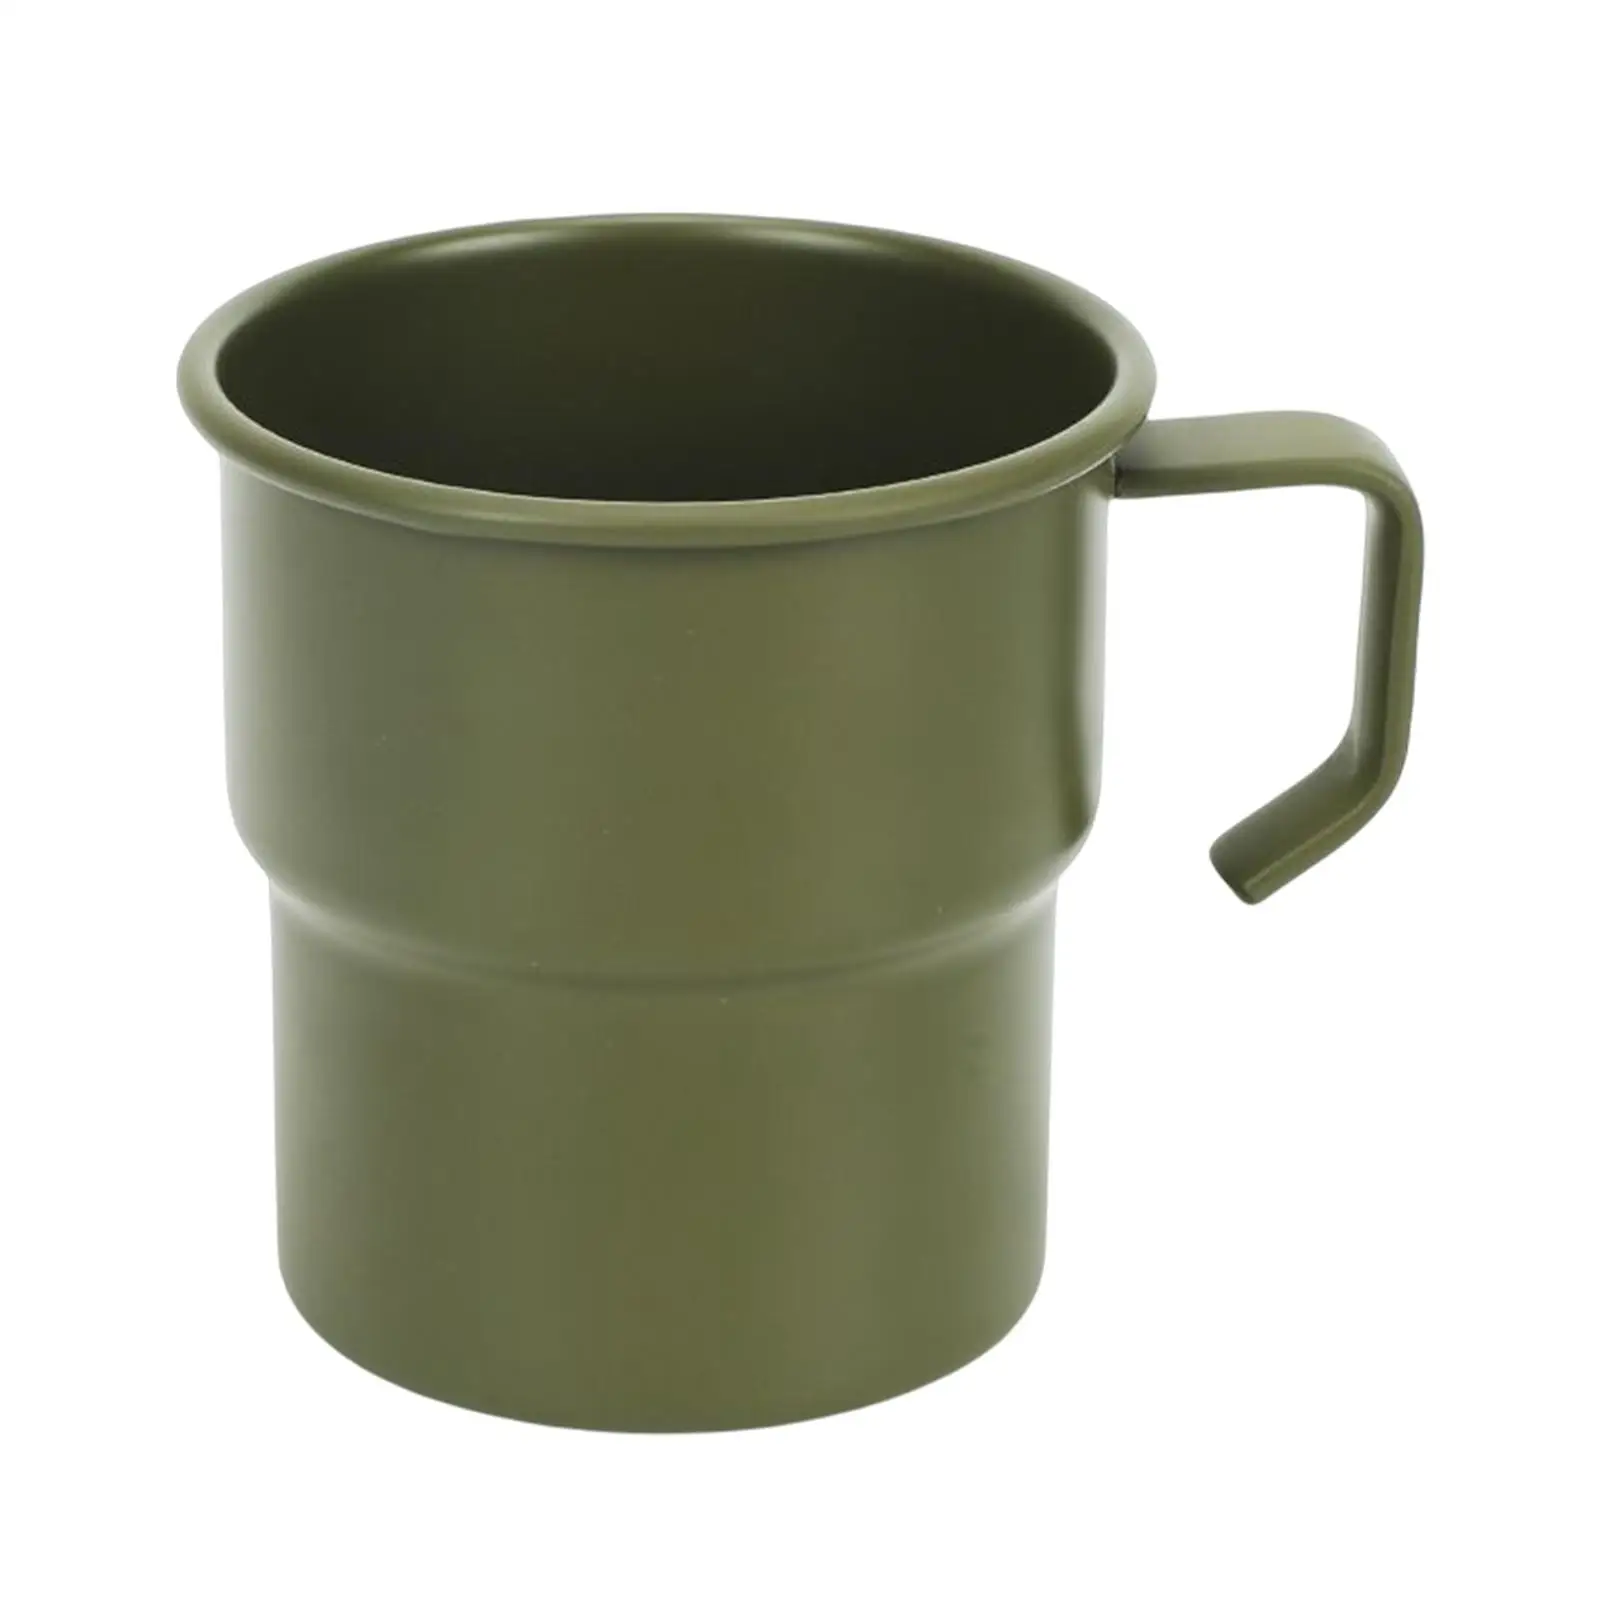 Portable Outdoor Tea Coffee Mug Kitchenware Cookware 300ml Camping Cup Beer Cup